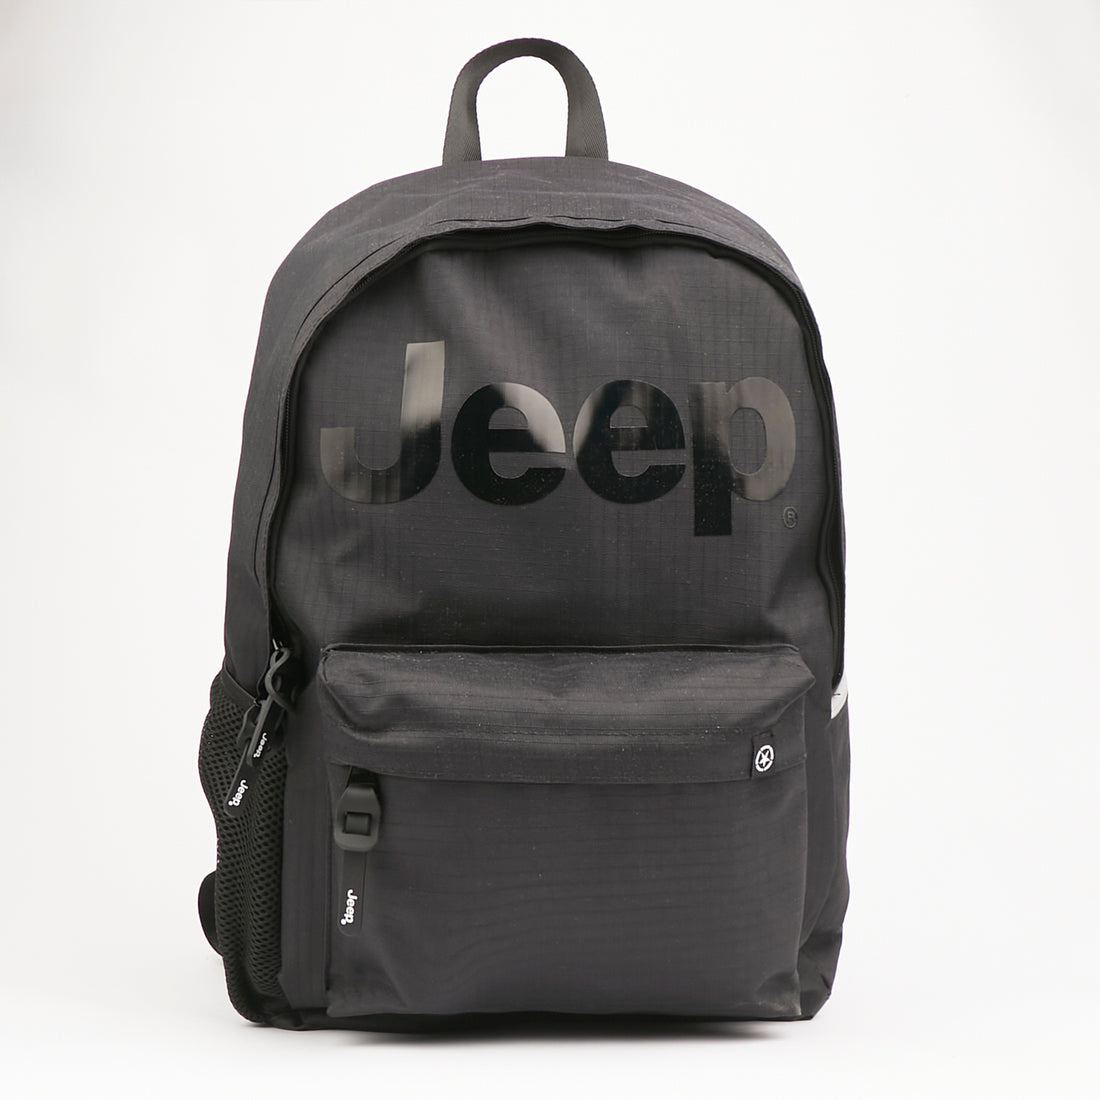 City Backpack & 